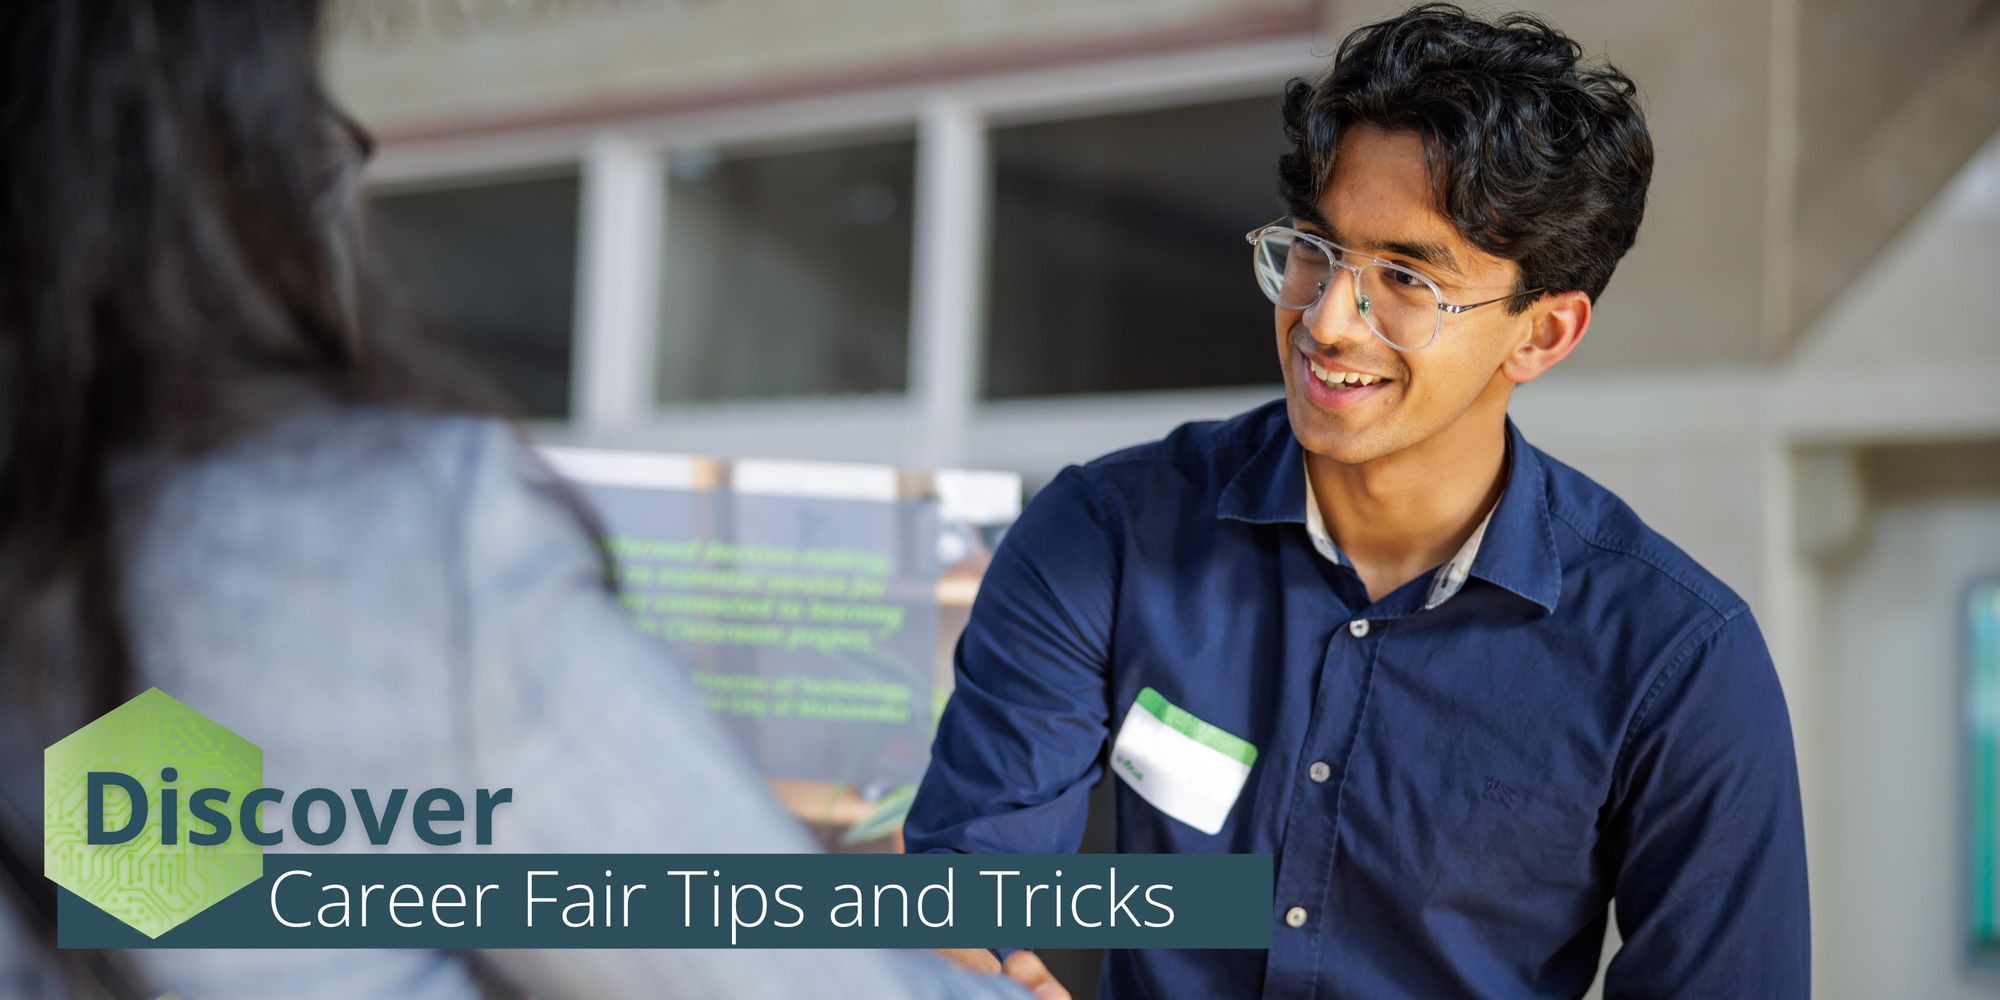 Discover Career Fair Tips and Tricks: Explore Your Interests and Launch Your Career